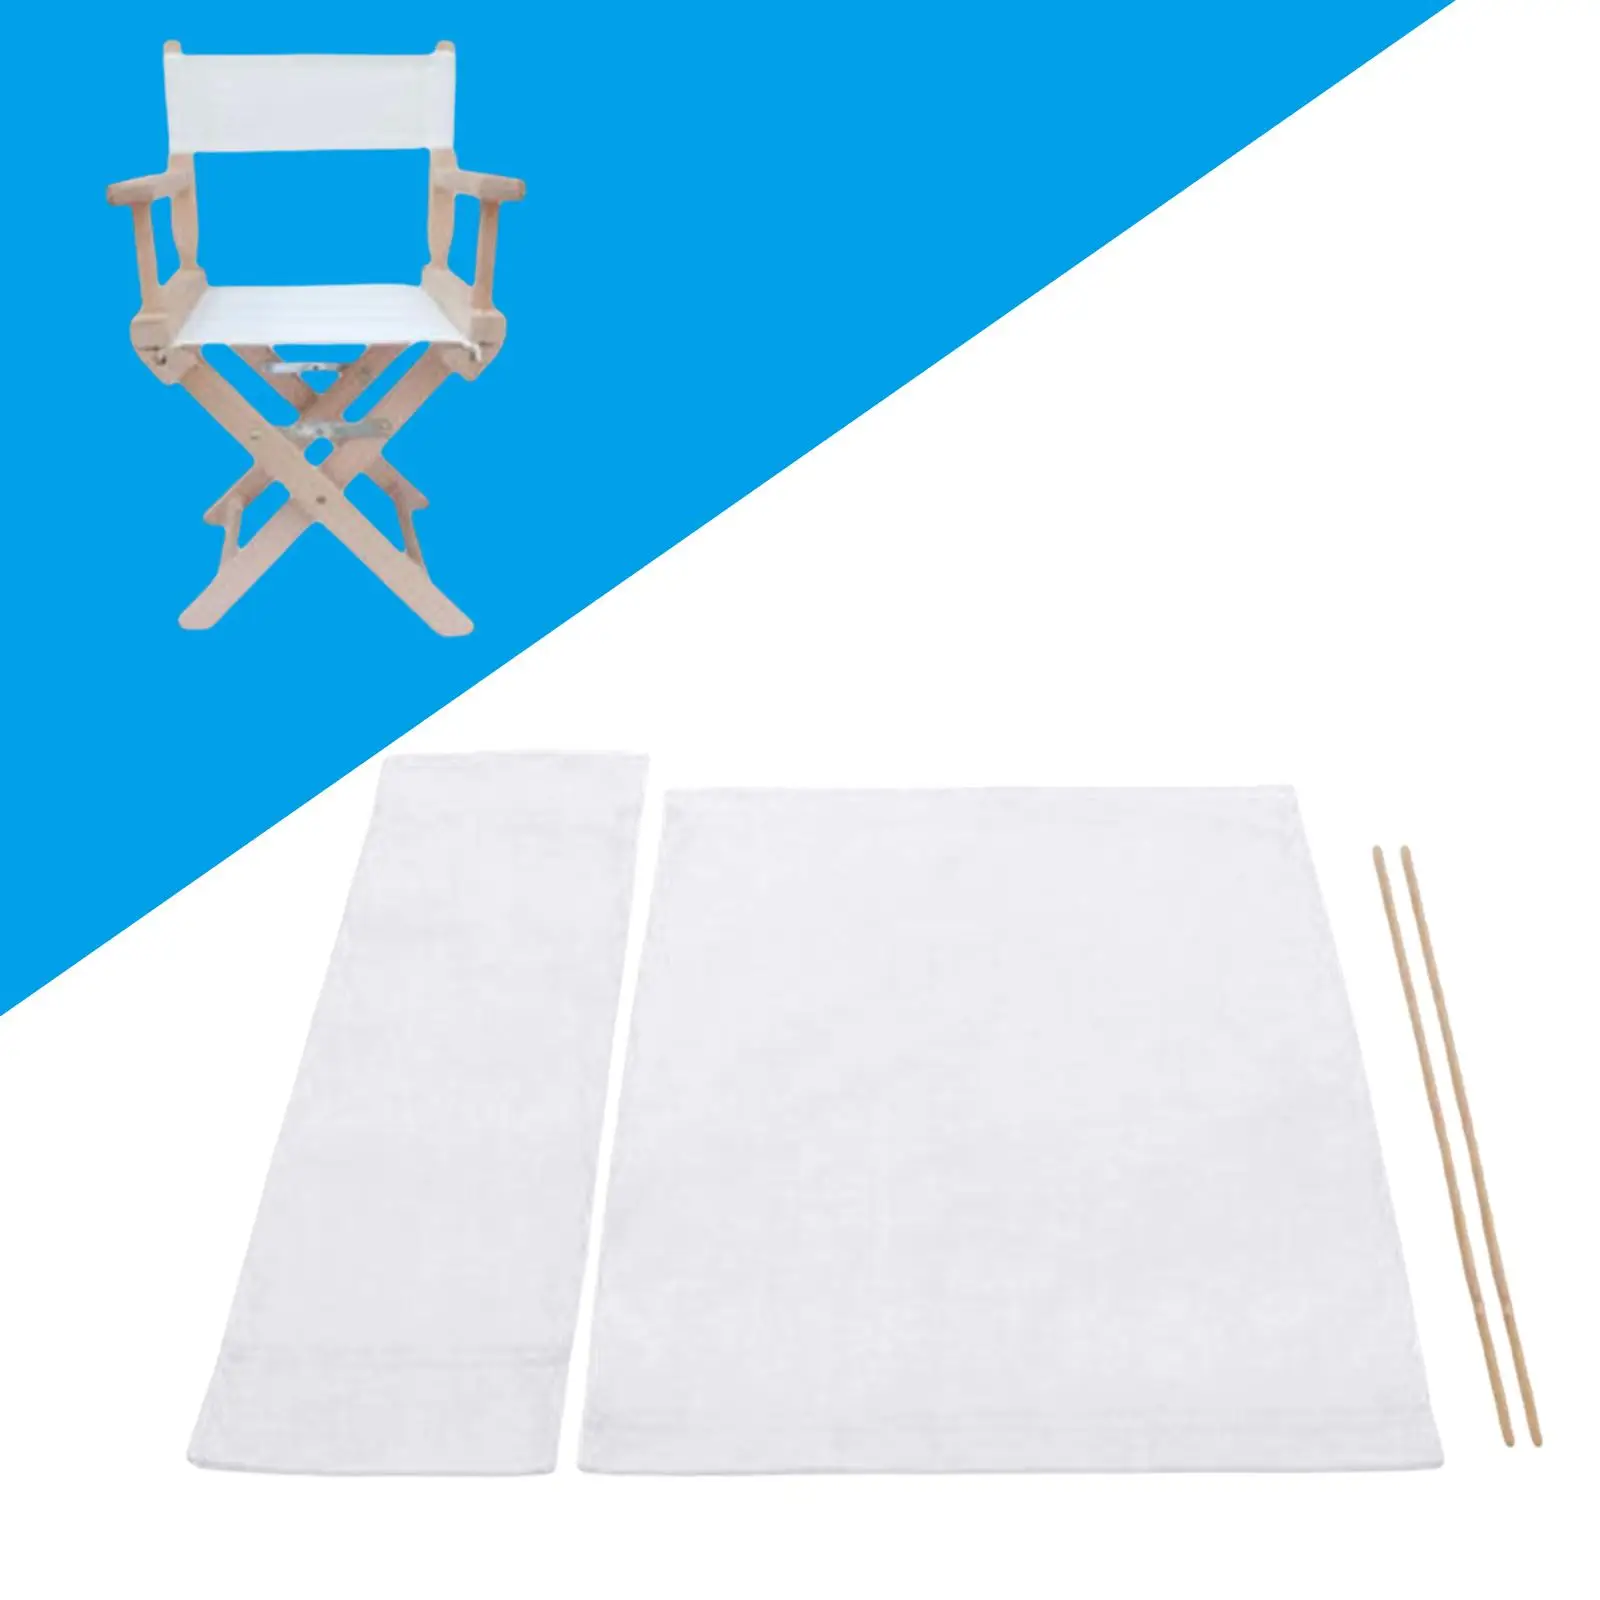 Directors Chairs Cover Easy to Clean Stool Protector Seat and Back Chair Replacement Seat Covers Chair Covers for Movie Chair